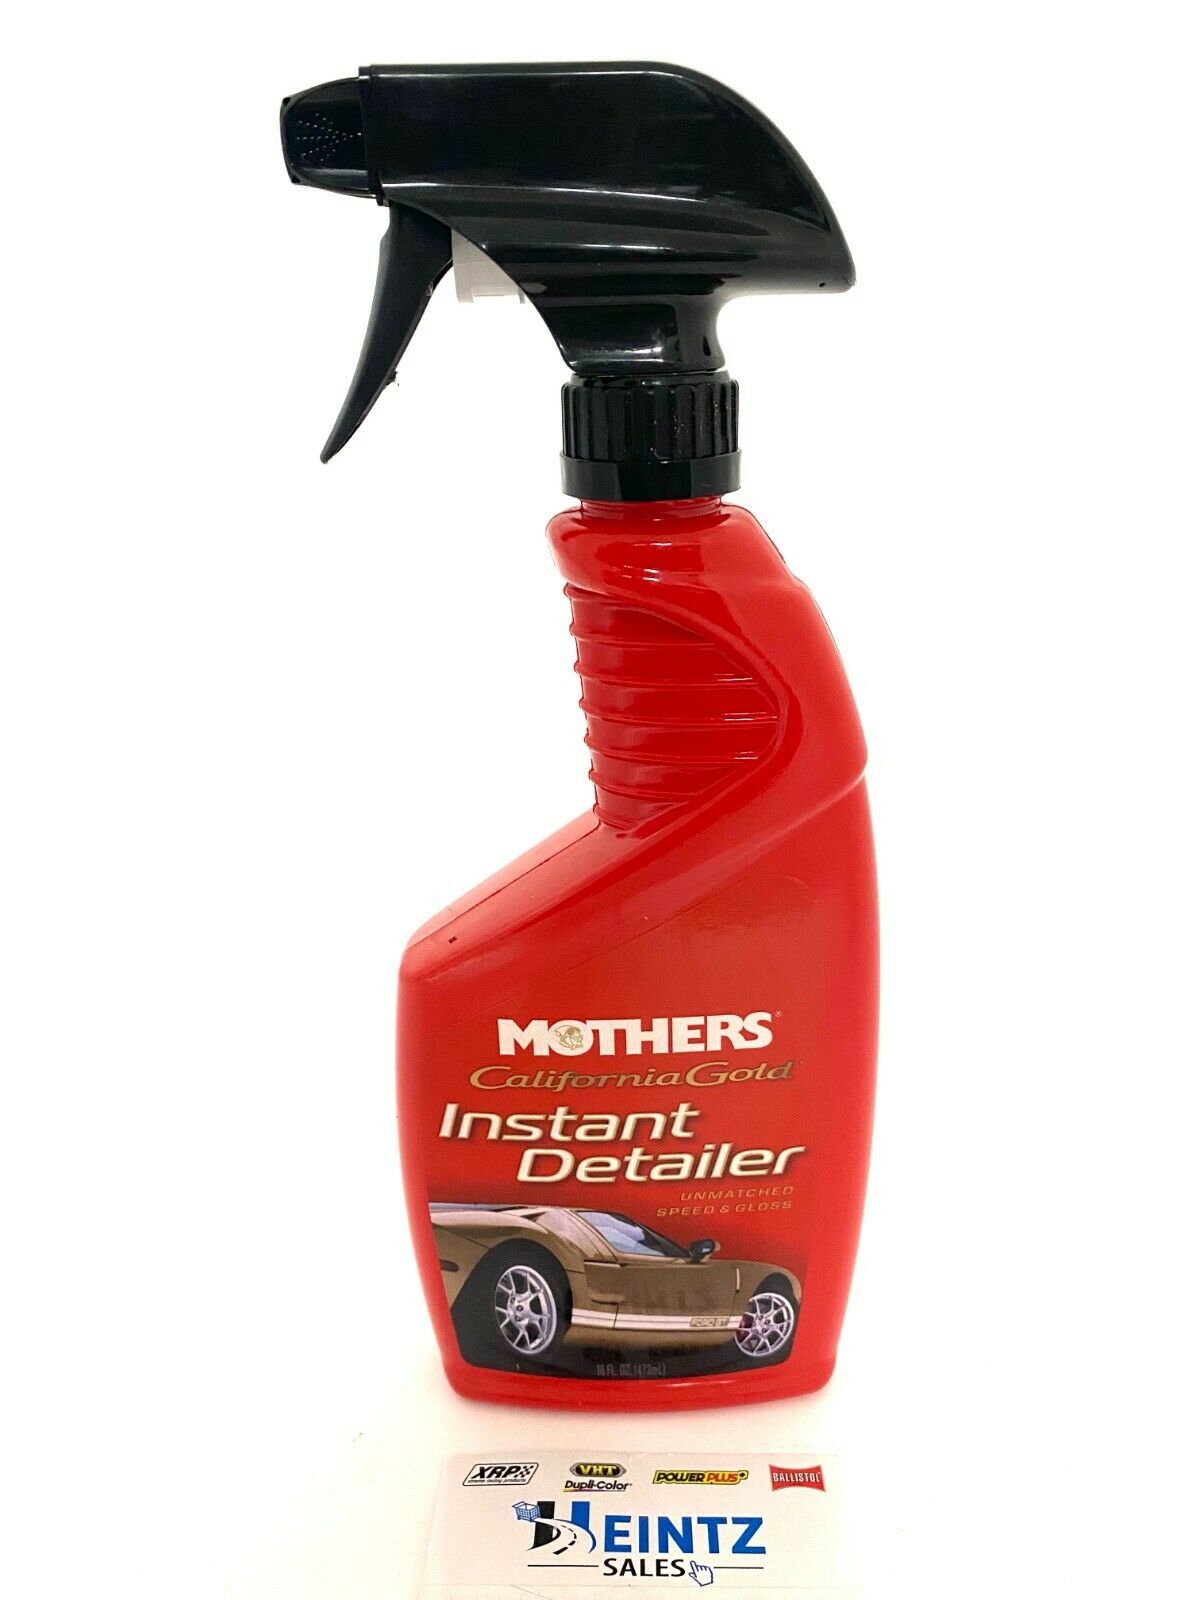 MOTHERS 08216 California Gold Instant Detailer Showtime - Unmatched Gloss - 16 oz.